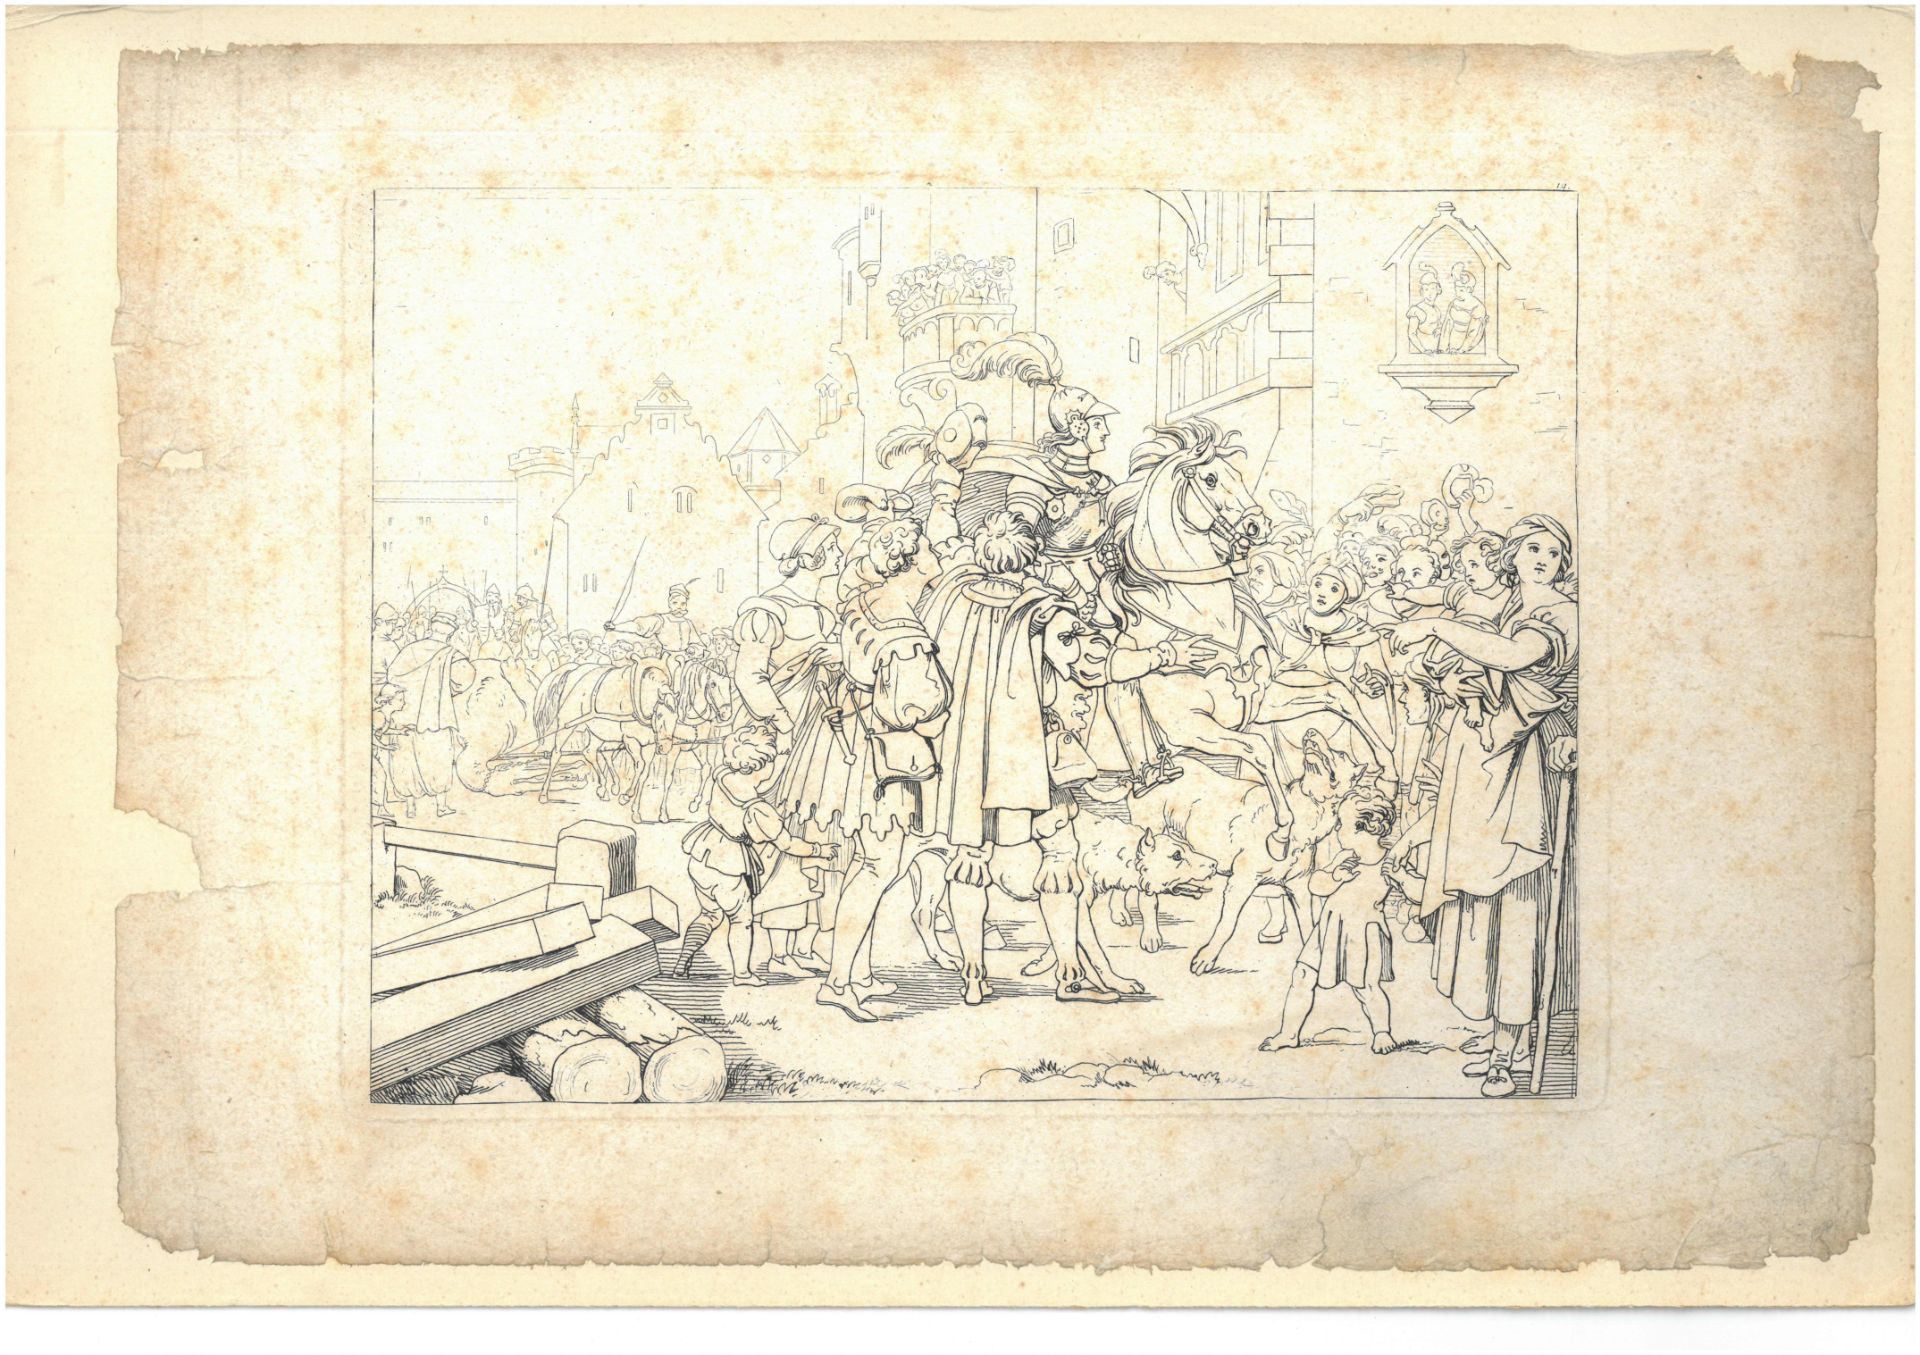 A portfolio of black and white illustration plates depicting the story of "Bolla" (possibly)  the - Image 15 of 18